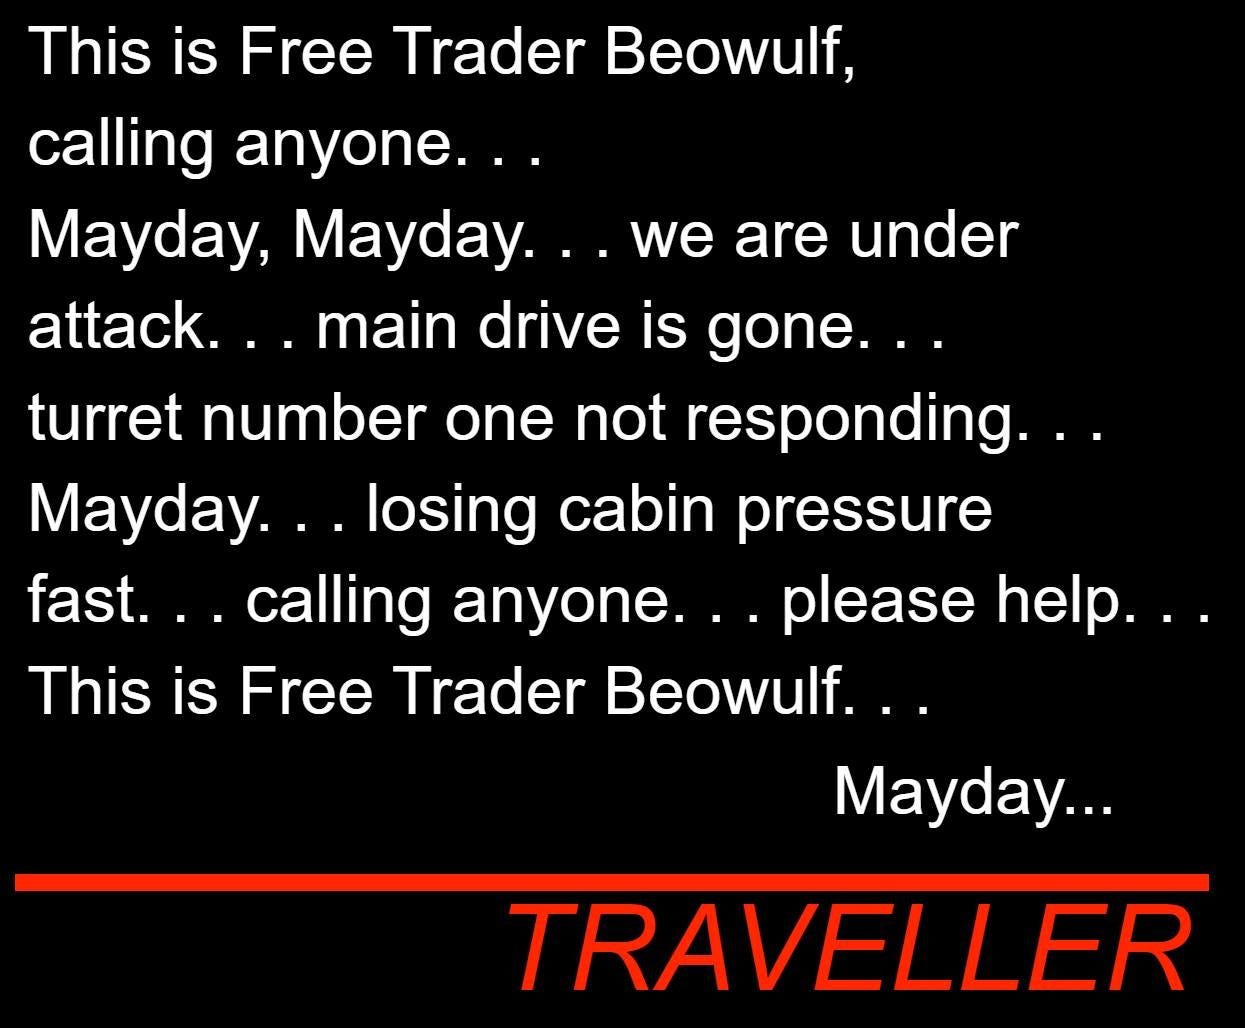 May be an image of text that says 'This is Free Trader Beowulf, calling anyone.... Mayday, Mayday... we are under attack. main drive is gone.... turret number one not responding... Mayday... losing cabin pressure fast. calling anyone. .please help.... This is Free Trader Beowulf... Mayday... TRAVELLER'